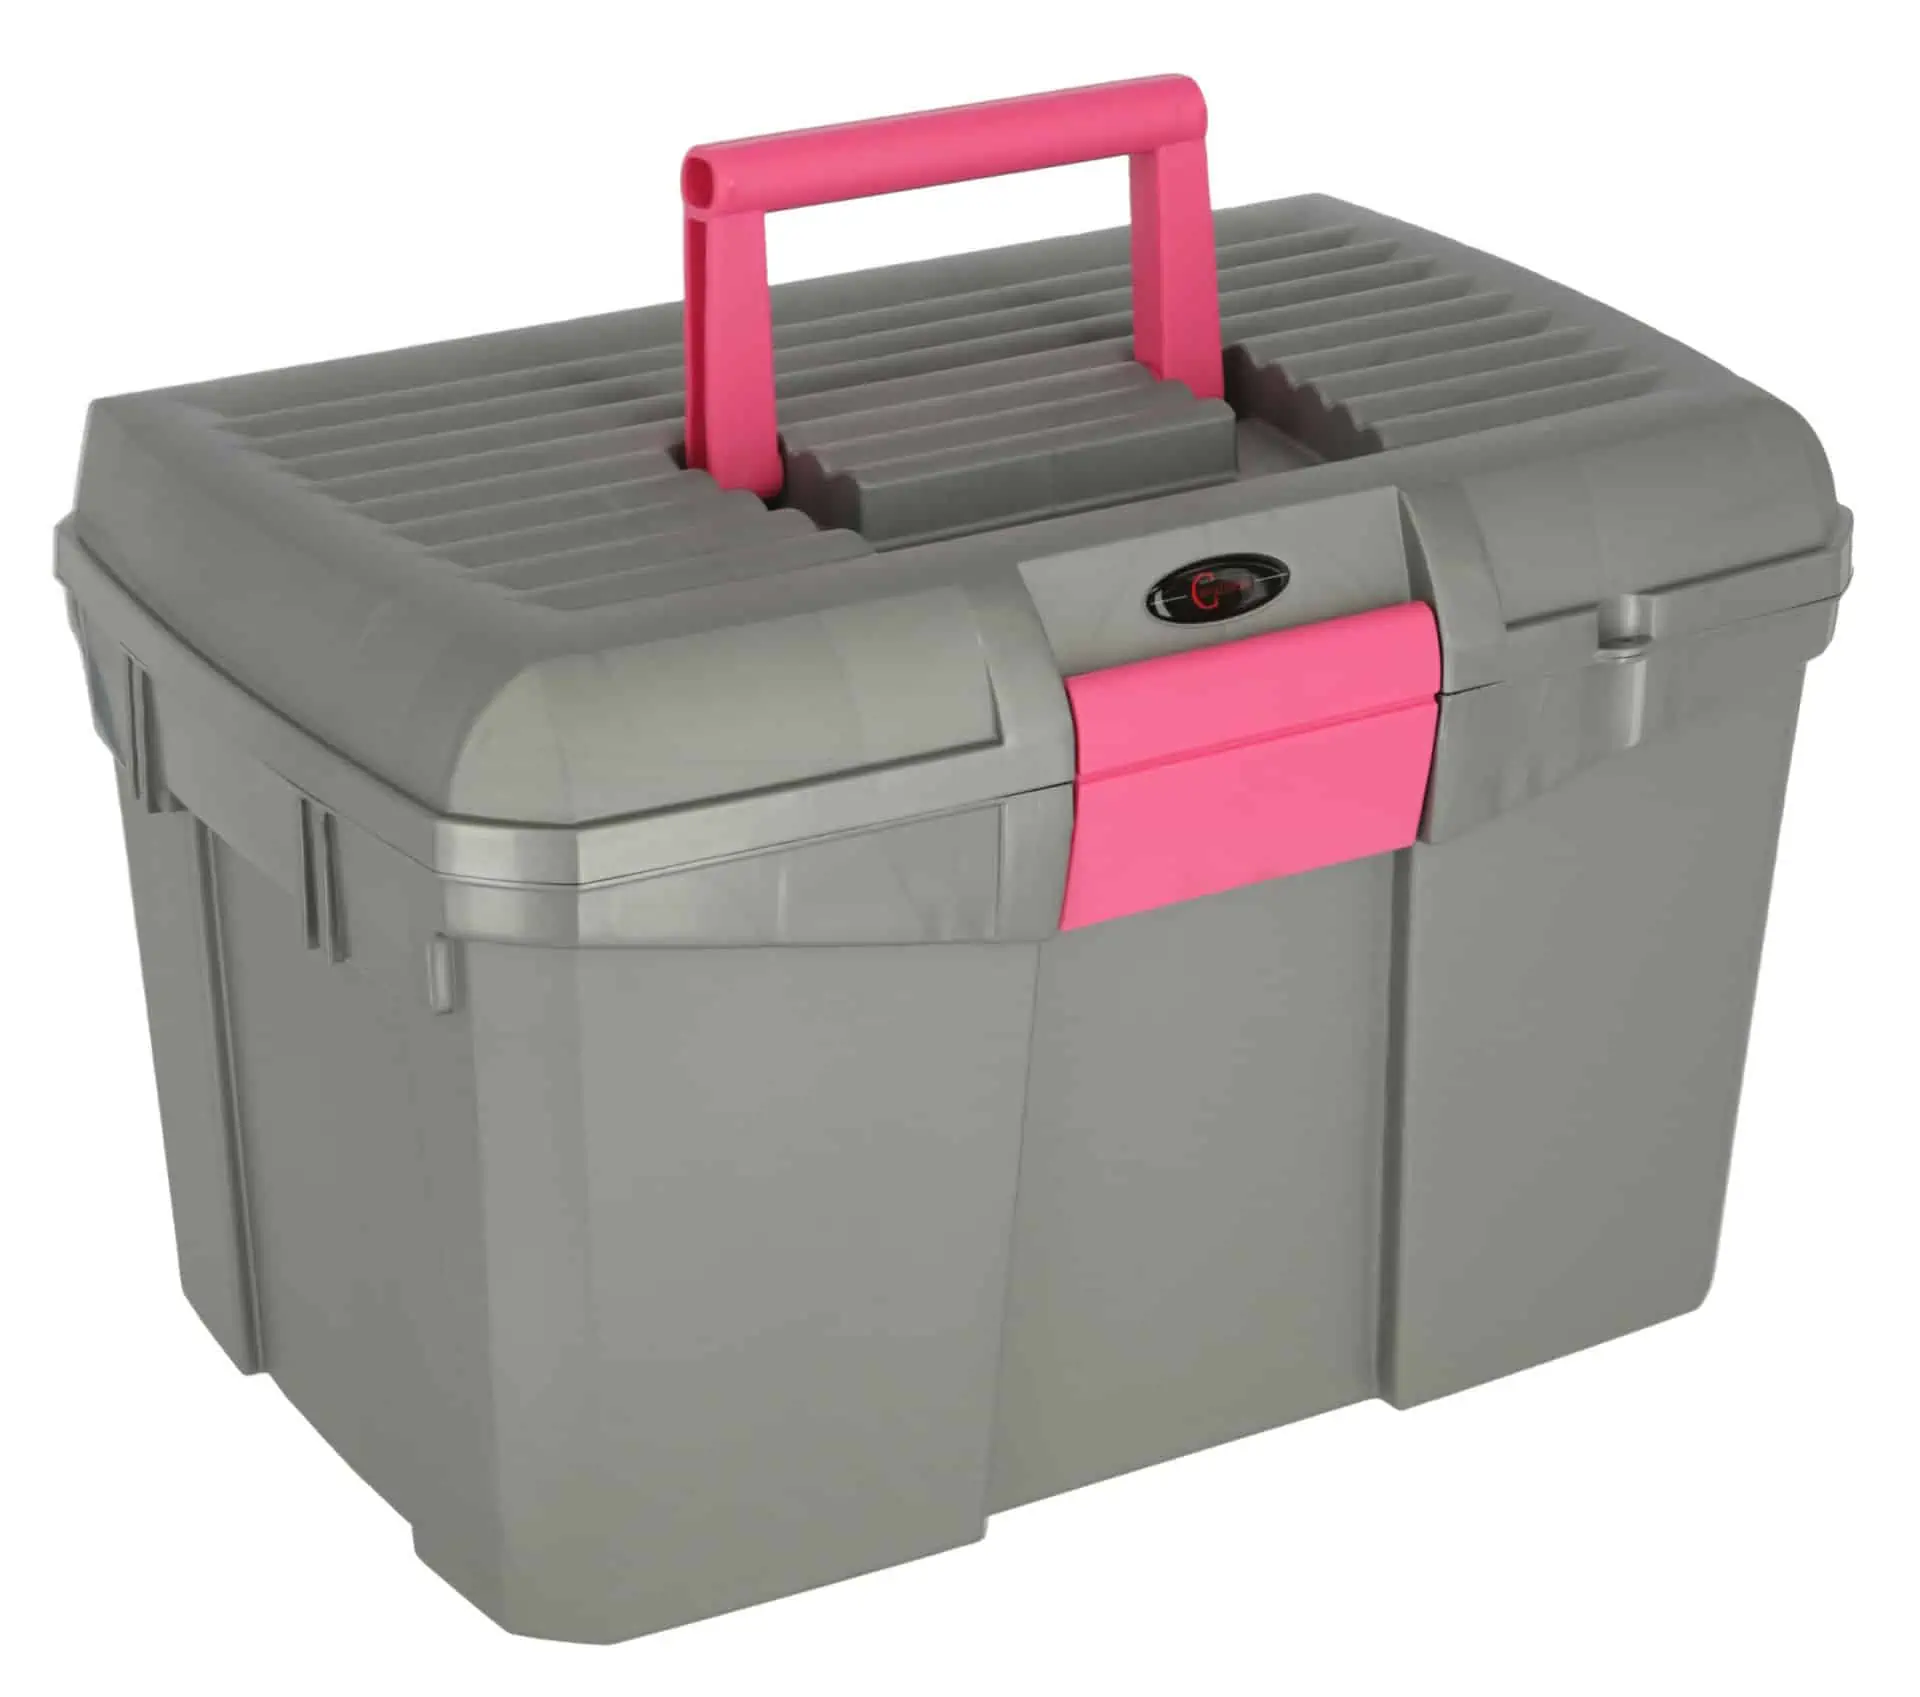 Grooming Box Siena grey/pink with Removable Insert